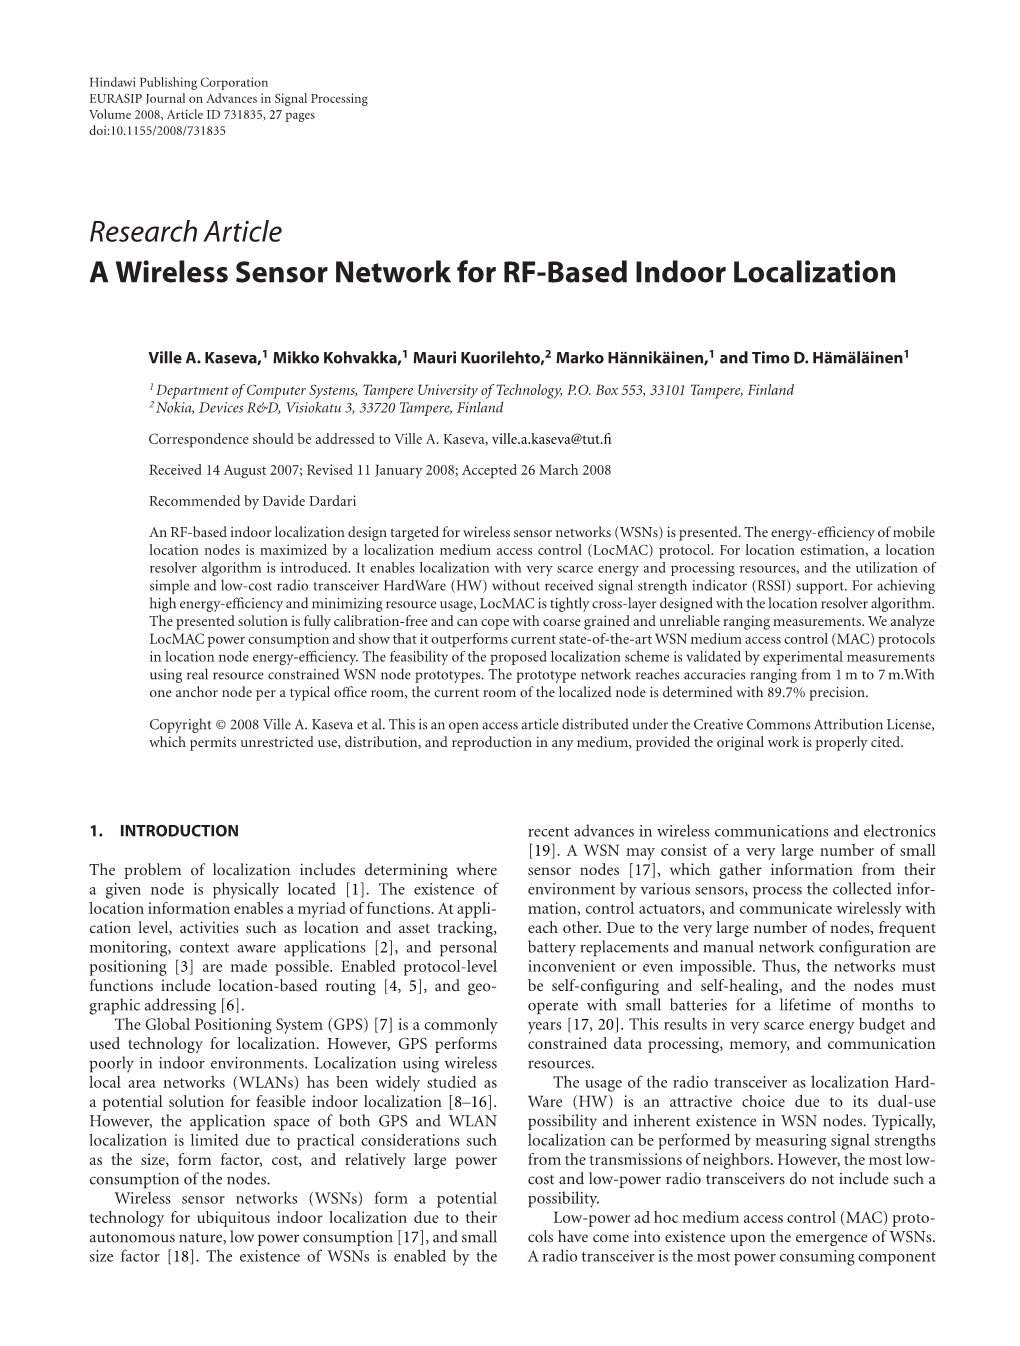 A Wireless Sensor Network for RF-Based Indoor Localization